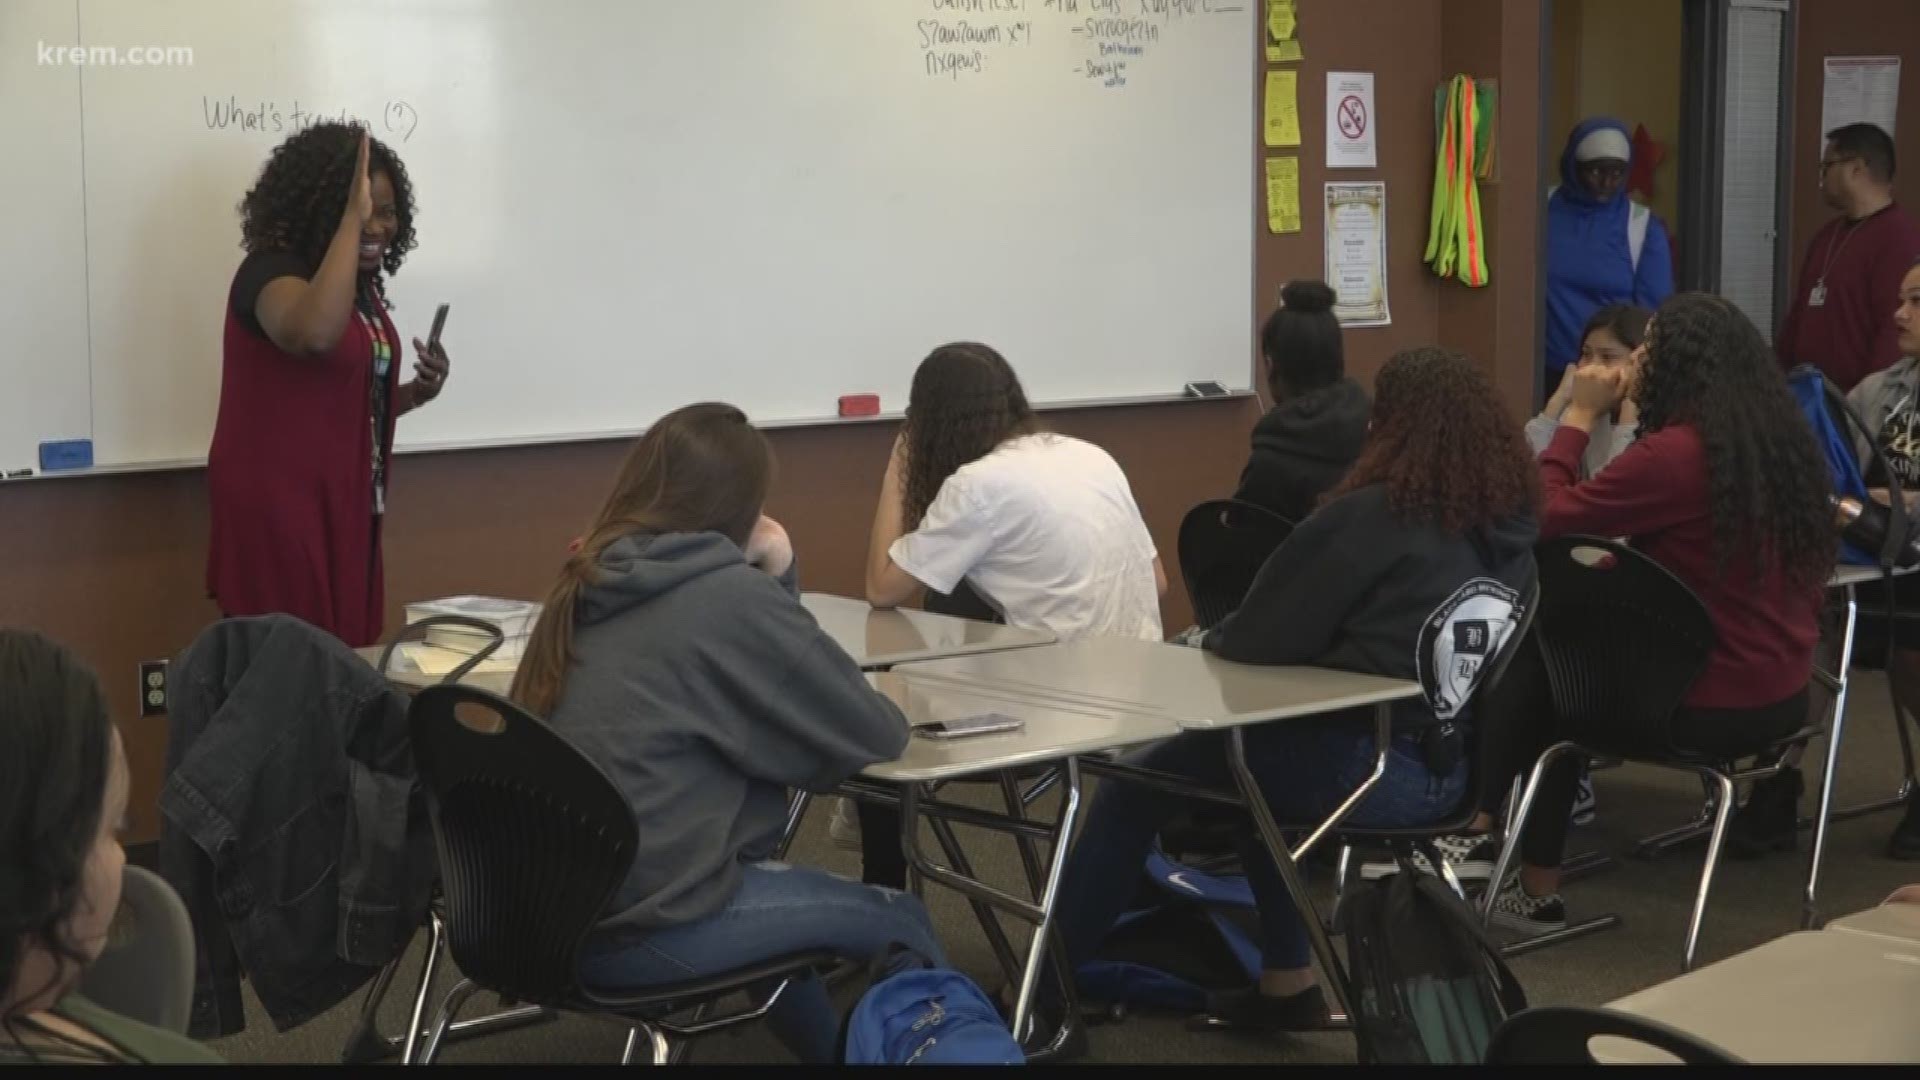 KREM Reporter Alexa Block visited with Rogers High School's SWAG club, which stands for Strong Women Achieving Greatness, a club aimed at empowering young female students.